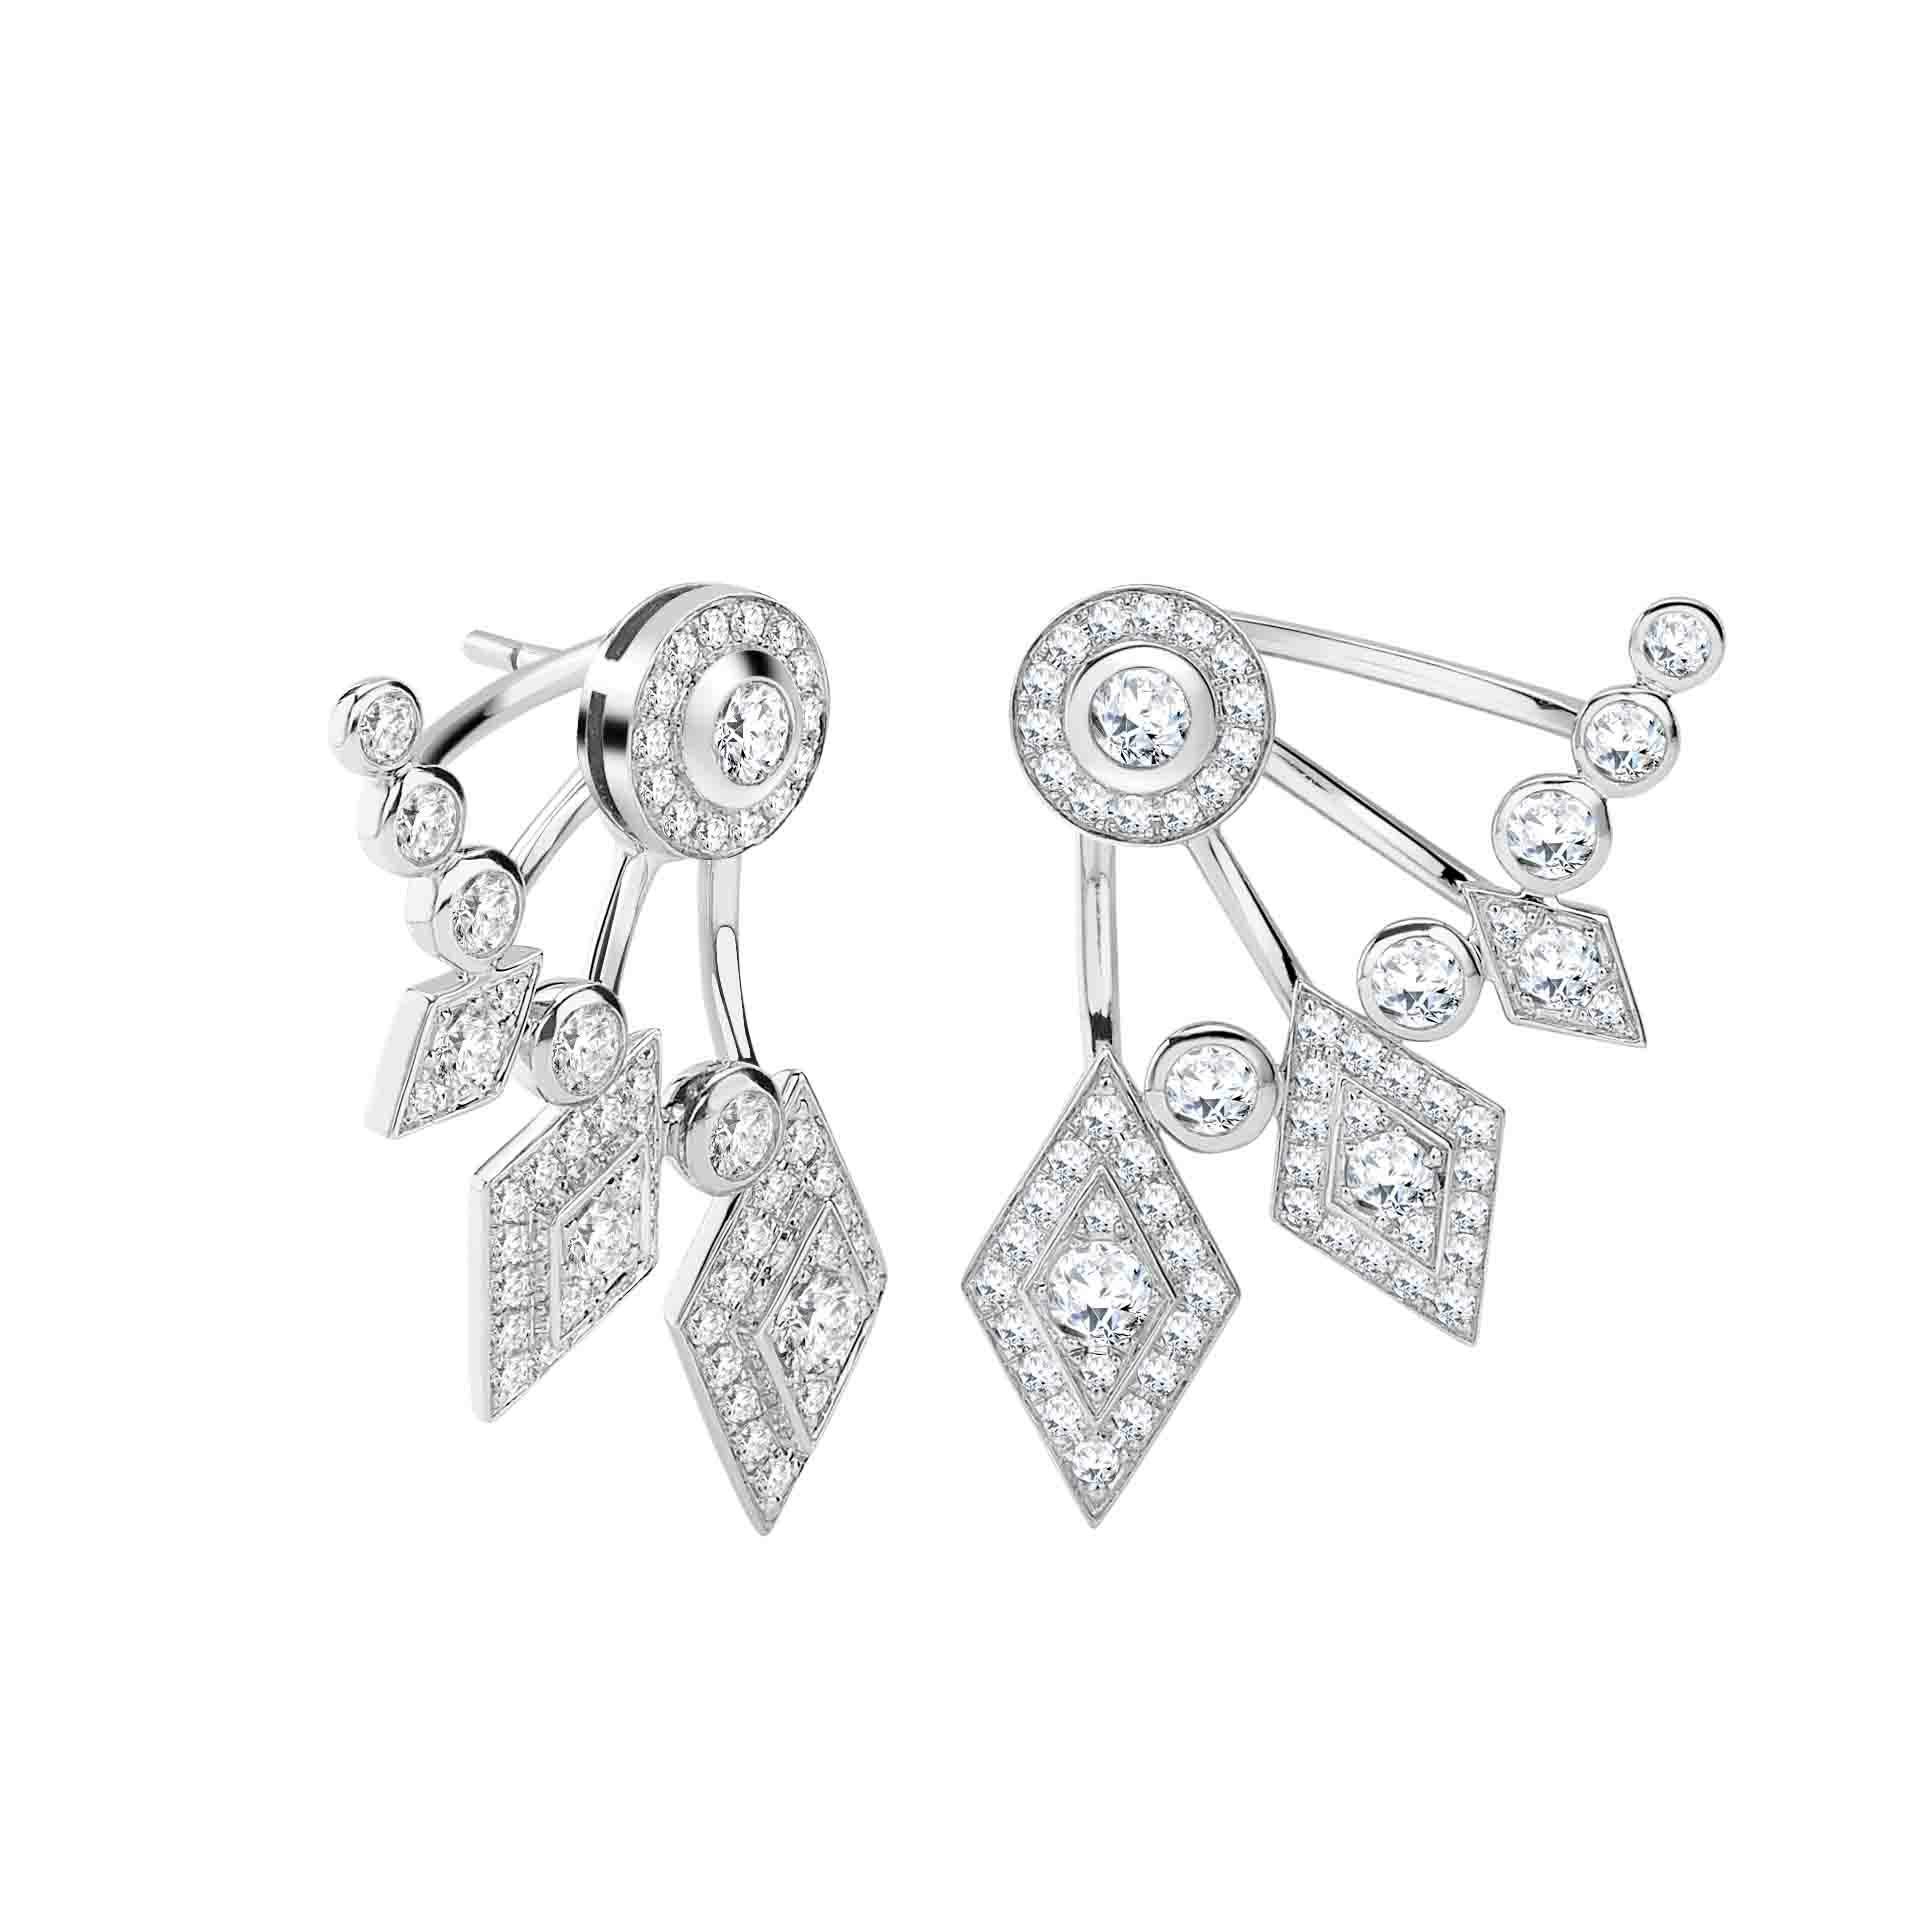 A pair of House of Garrard 18 karat white gold ear jacket stud earrings from the Twenty Four collection set 122 round white diamonds weighing 1.36 carats. The earrings can be worn with adjustable ear jackets or as stud earrings. 

122 round white